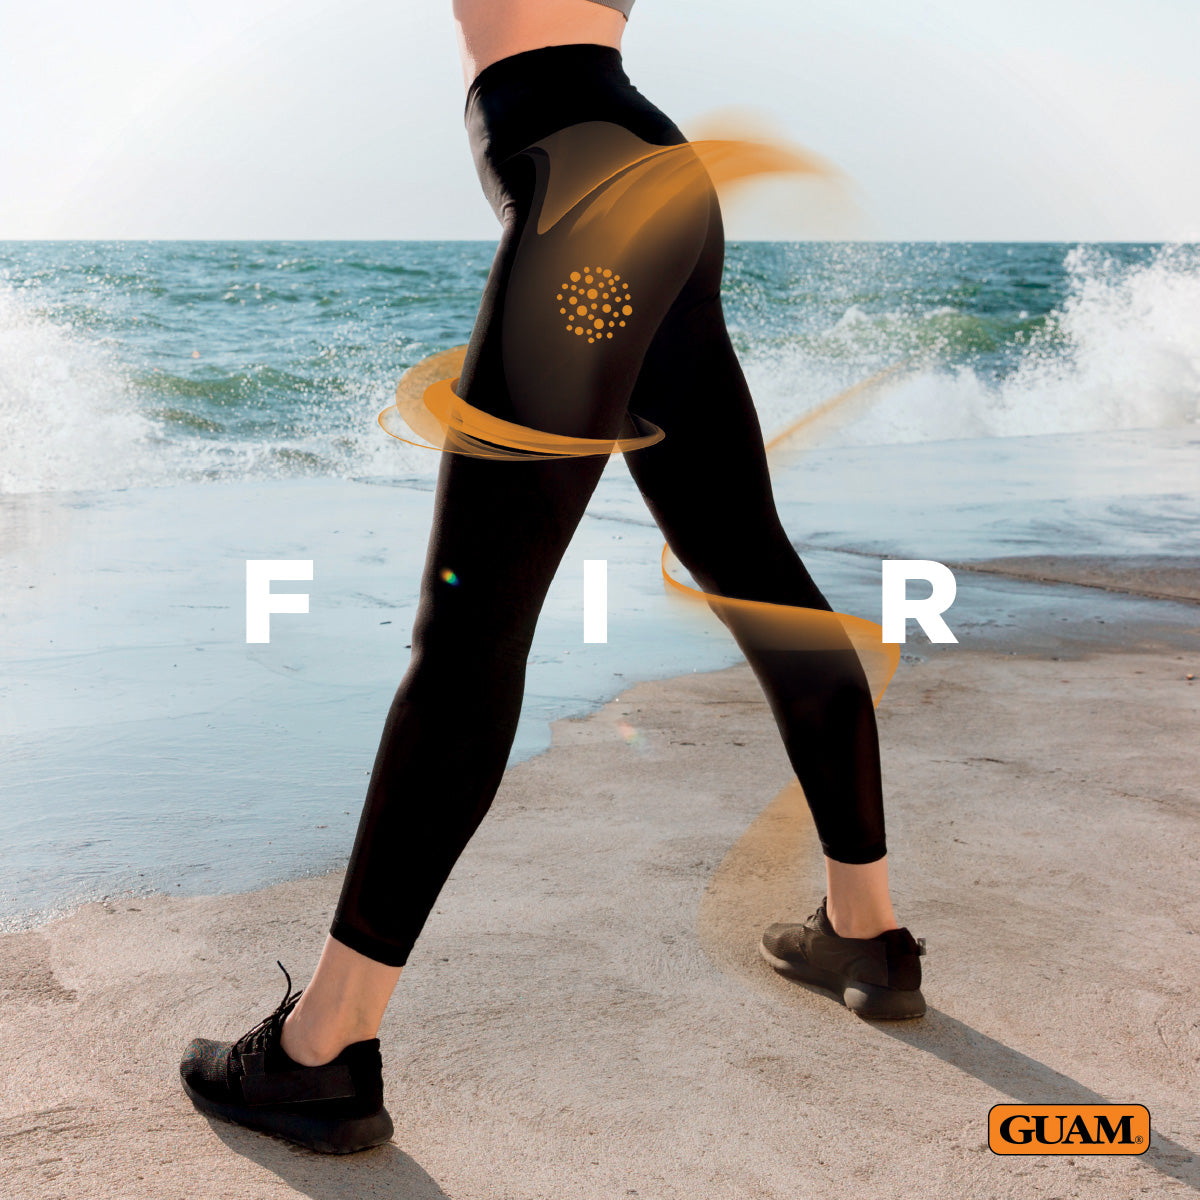 Guam Anti-Cellulite Leggings for Women Power FIT, Seaweed Infrared Heat  Reflecting Fabric, Cellulite Reducing Gym Pants